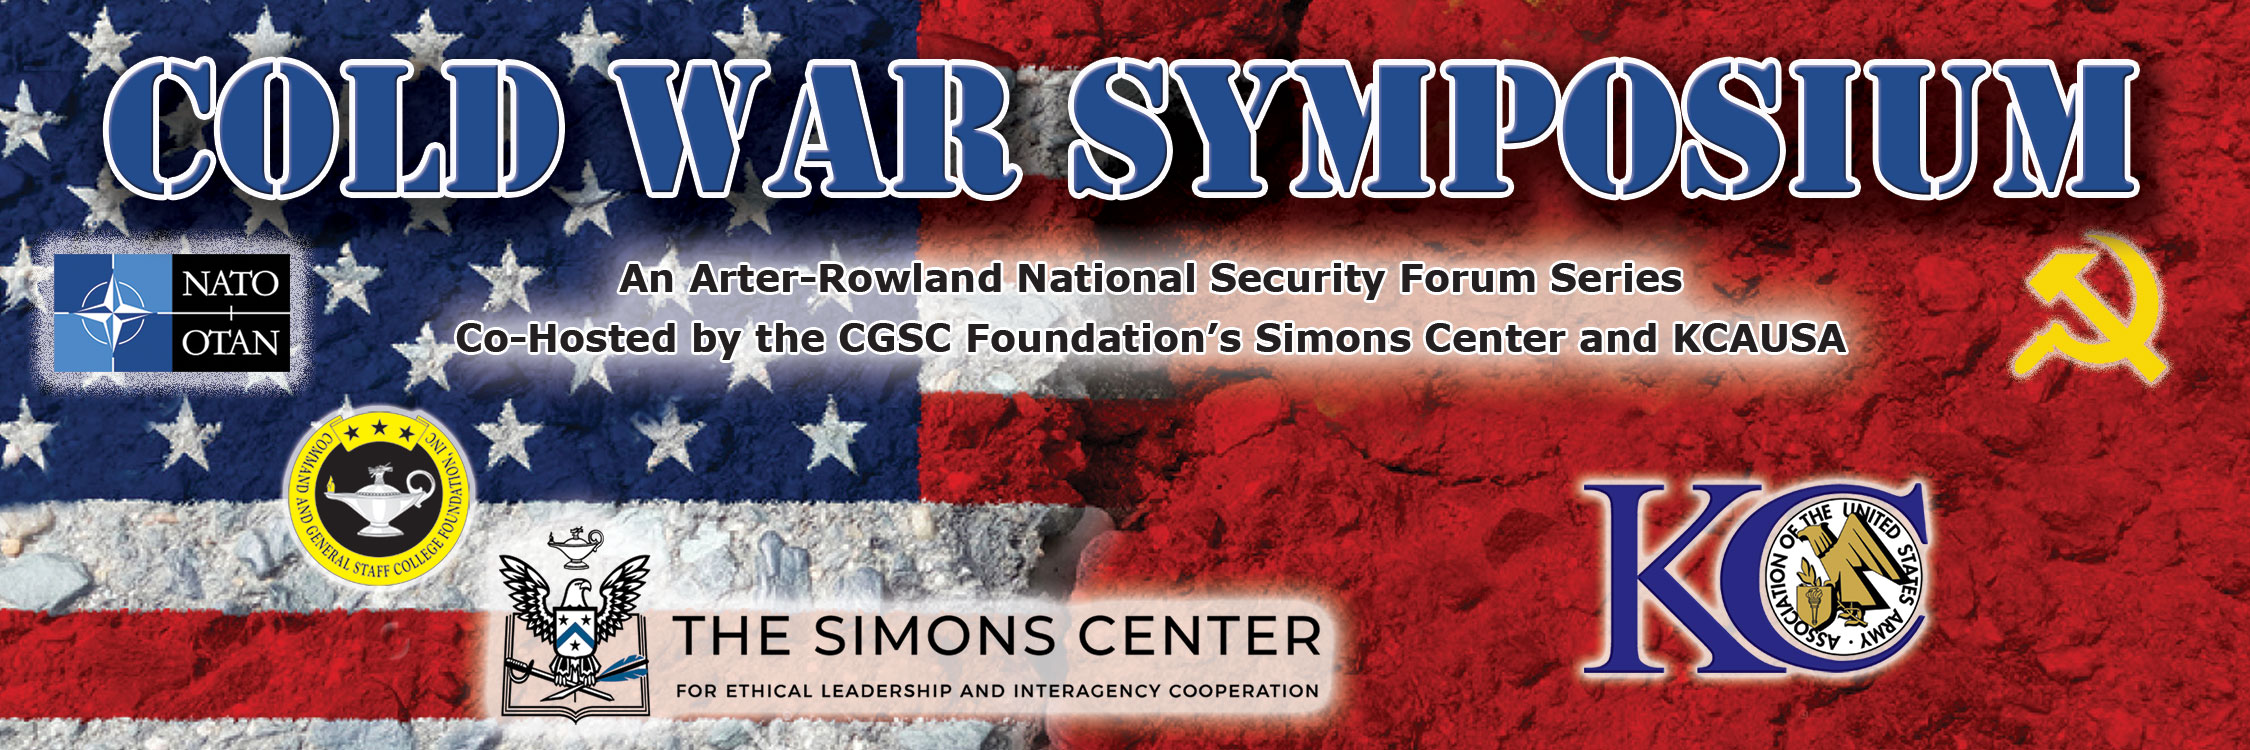 Cold War Symposium composite image with the US and USSR flags in the background, NATO logo and Soviet Hammer and Sickle art over the background. "Cold War Symposium" text at the top over CGSC Foundation, Simons Center and KCAUSA logos.